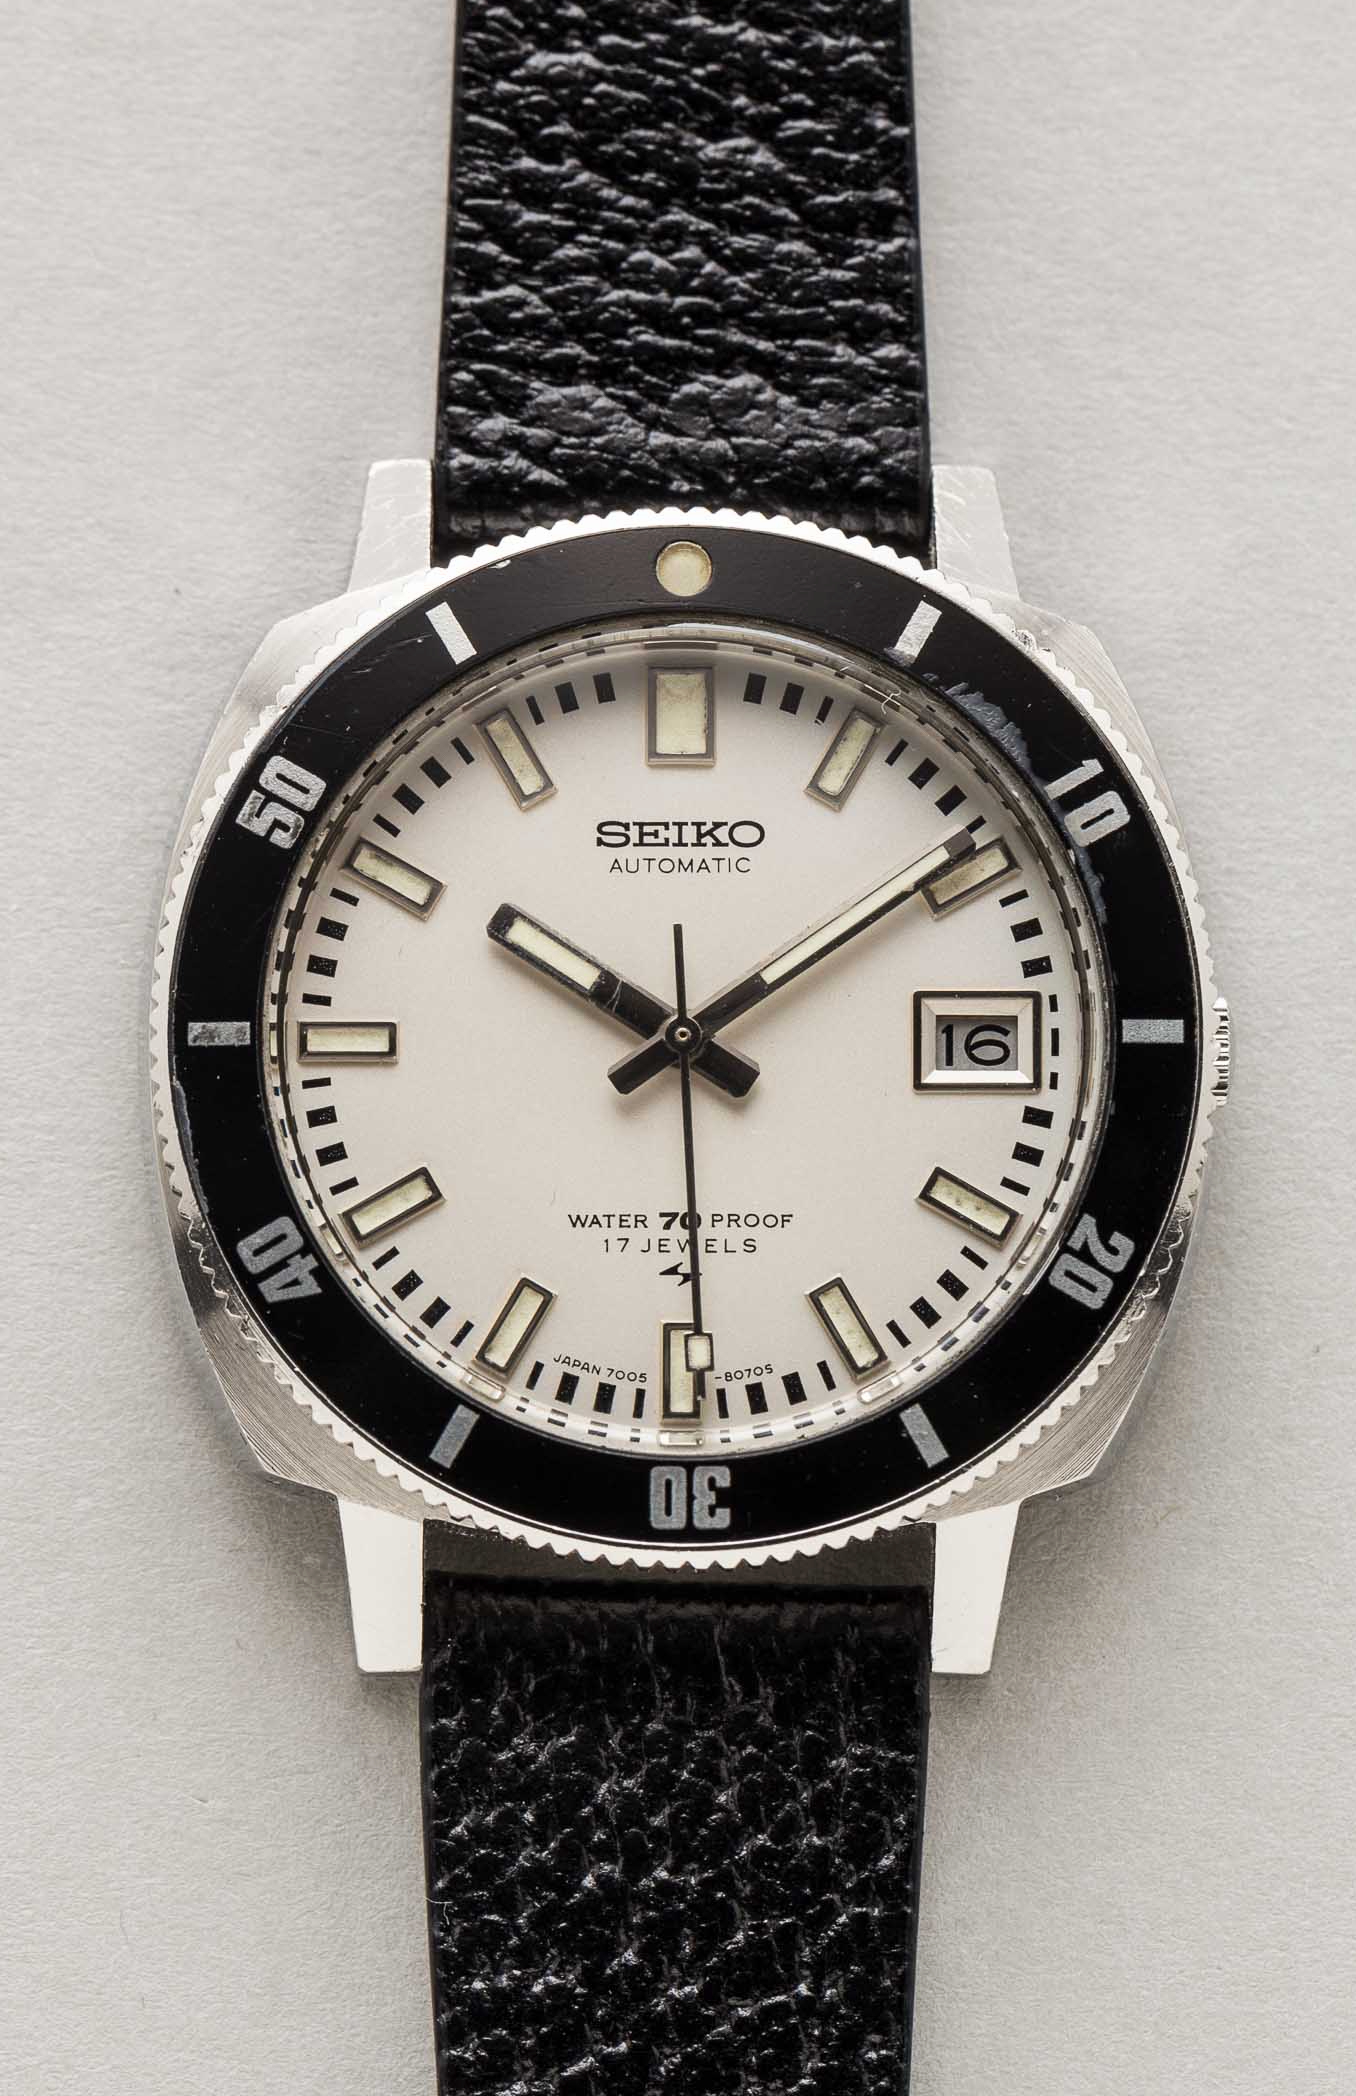 Seiko 7005-8050 Vintage Diver - Shuck the Oyster Vintage Watches